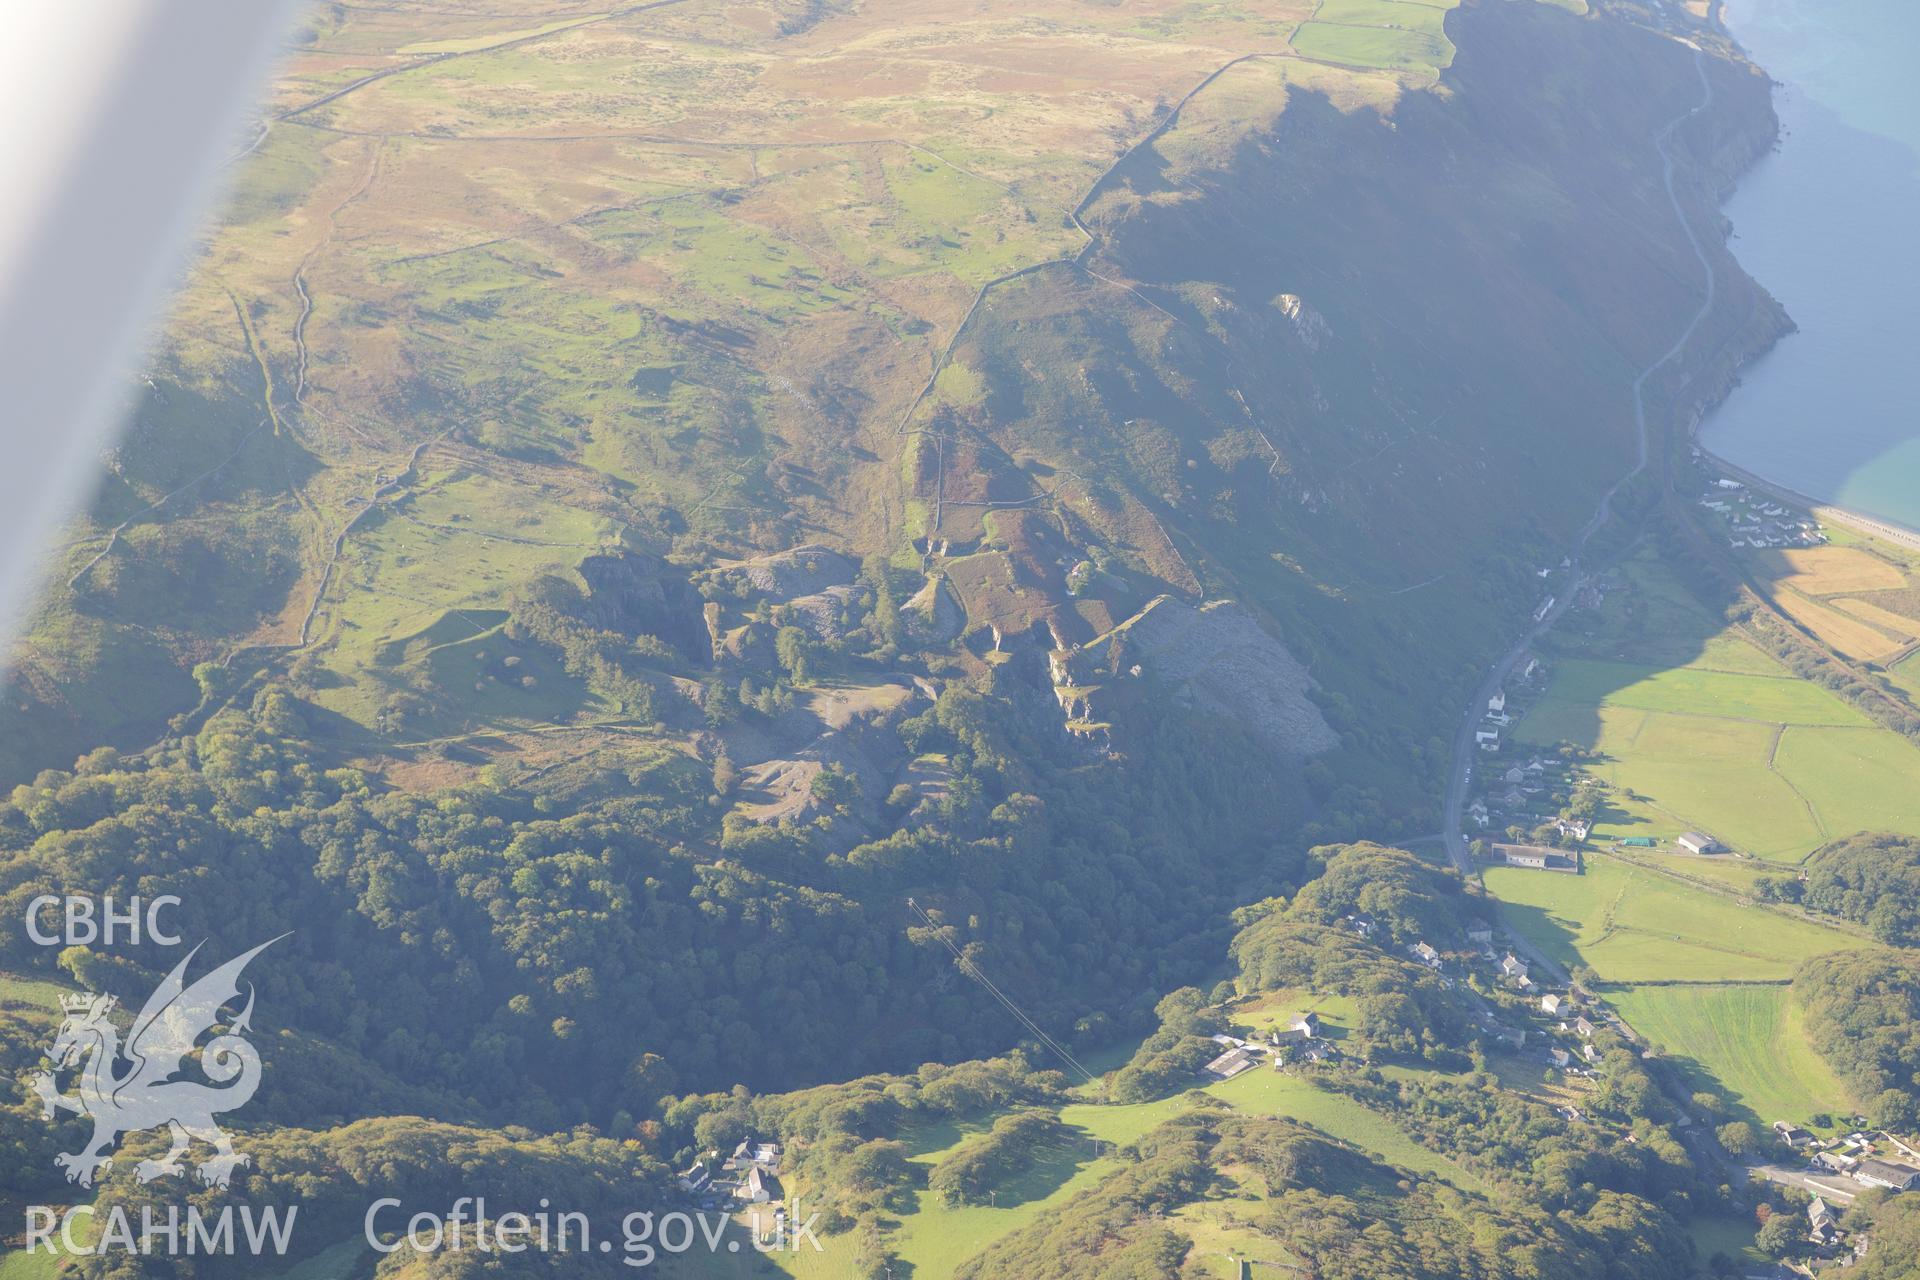 Hen-Ddol slate quarry, south east of Fairbourne. Oblique aerial photograph taken during the Royal Commission's programme of archaeological aerial reconnaissance by Toby Driver on 2nd October 2015.